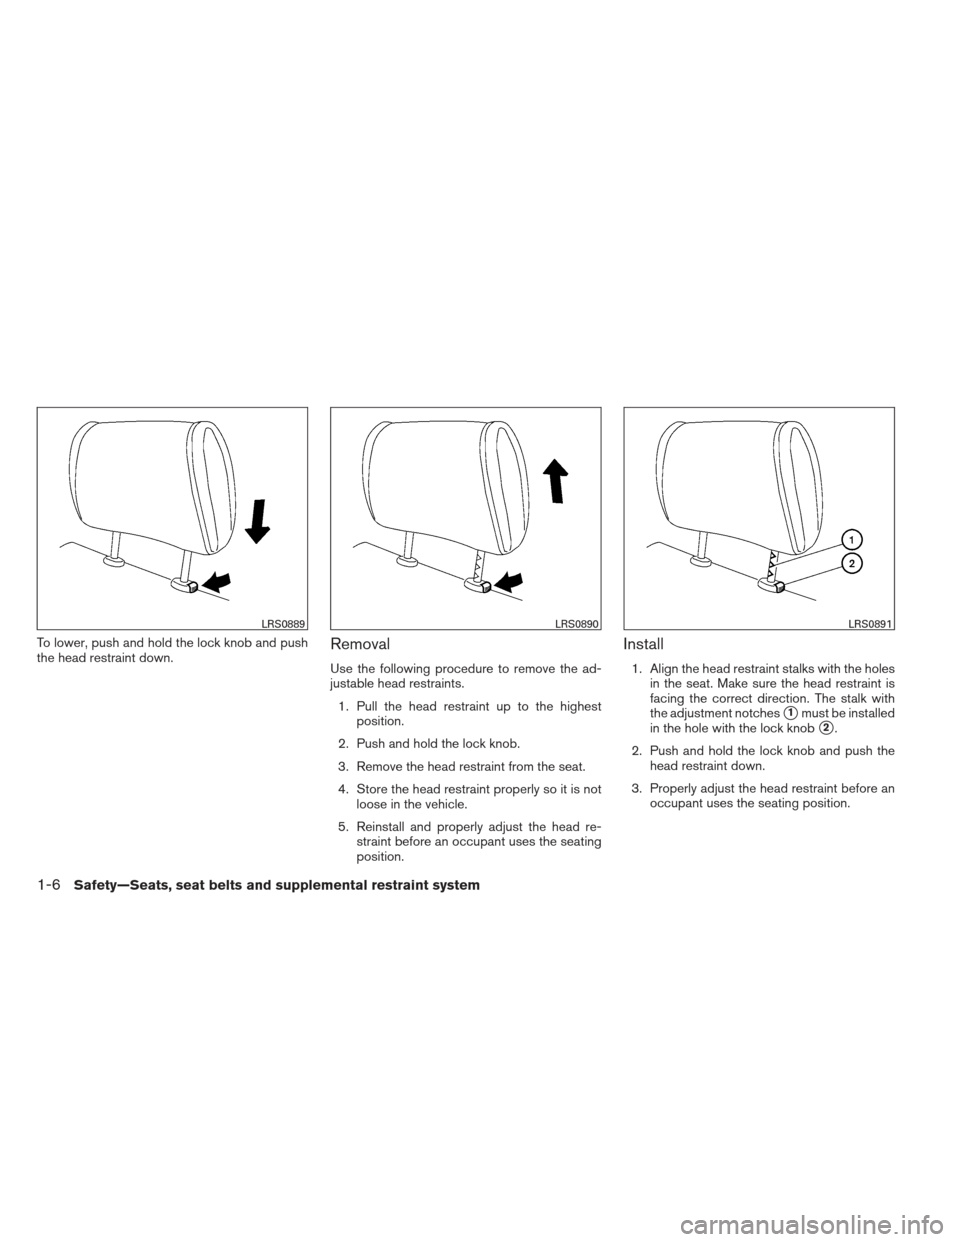 NISSAN XTERRA 2012 N50 / 2.G Owners Manual To lower, push and hold the lock knob and push
the head restraint down.Removal
Use the following procedure to remove the ad-
justable head restraints.1. Pull the head restraint up to the highest posit